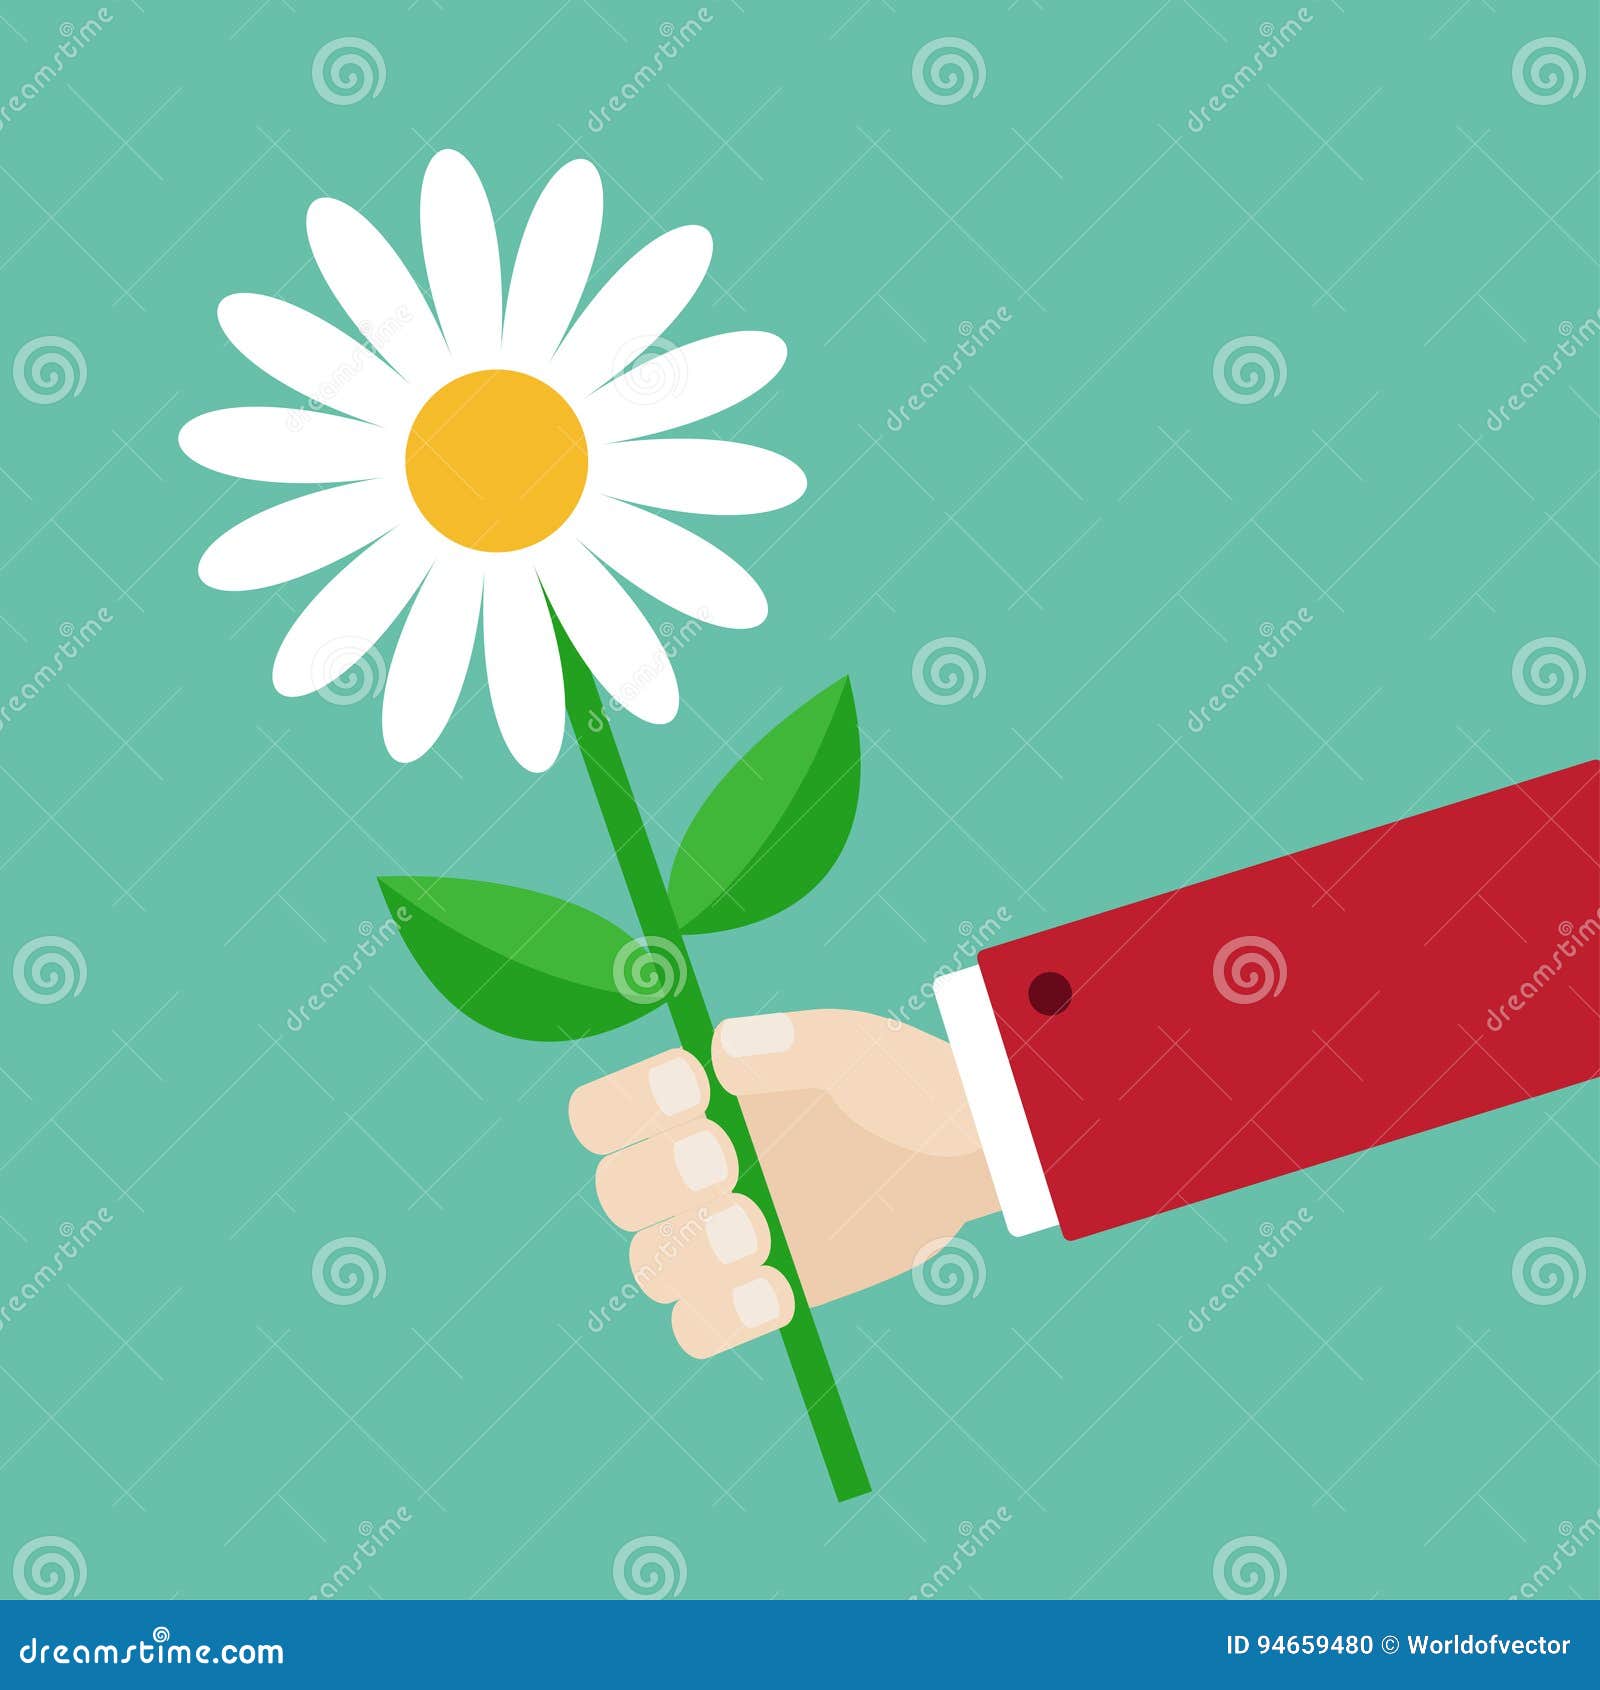 Businessman Hand Holding White Daisy Flower. Giving Gift Concept. Cute Cartoon  Character. Red Suit. Greeting Card. Flat Design Stock Vector - Illustration  of daisy, anniversary: 94659480